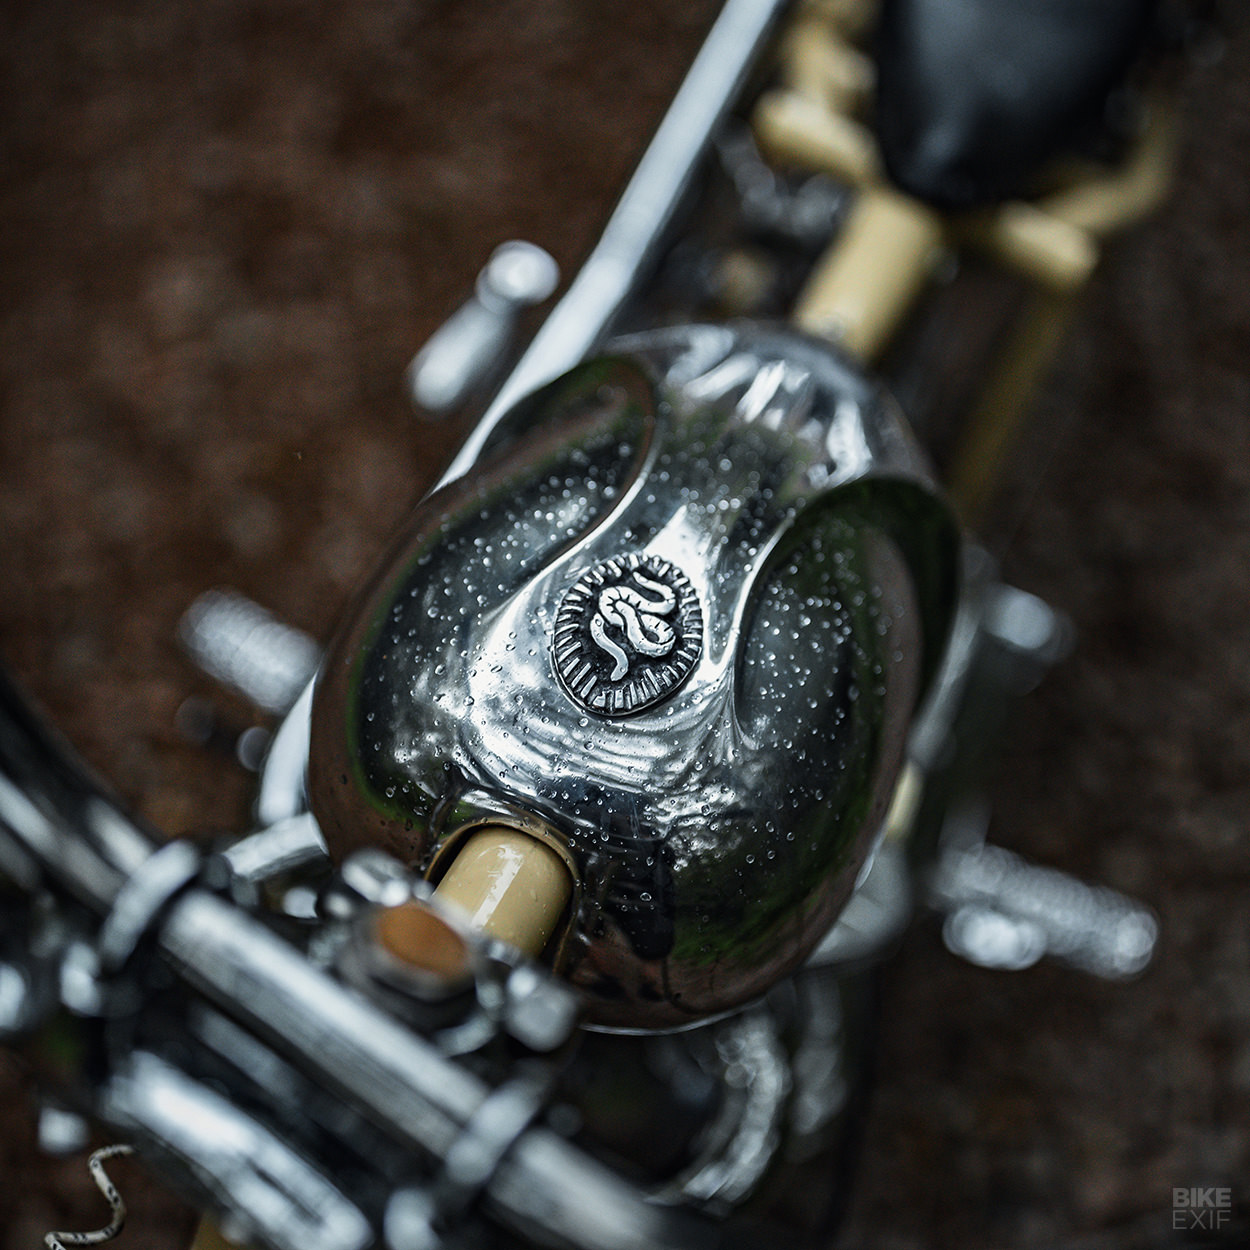 Triumph chopper by Robbie Palmer for Born Free Peoples Champ